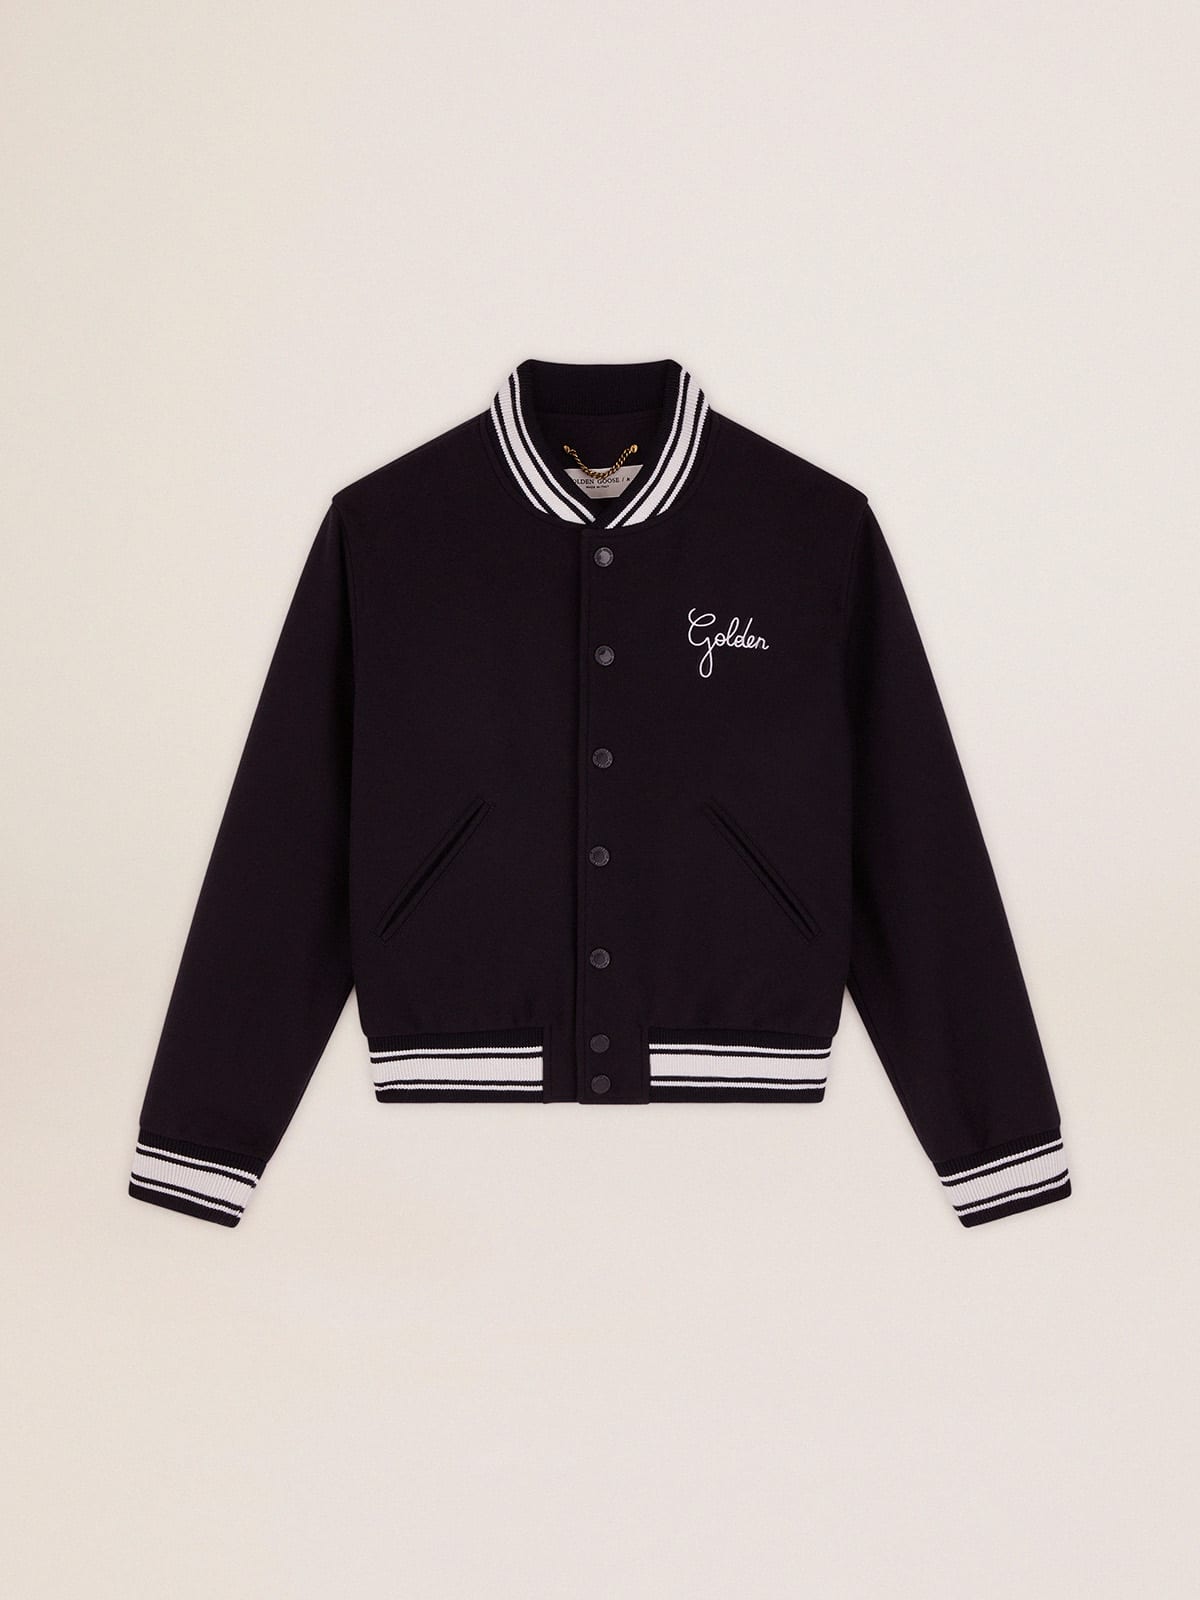 Bomber jacket in dark blue wool with contrasting white details